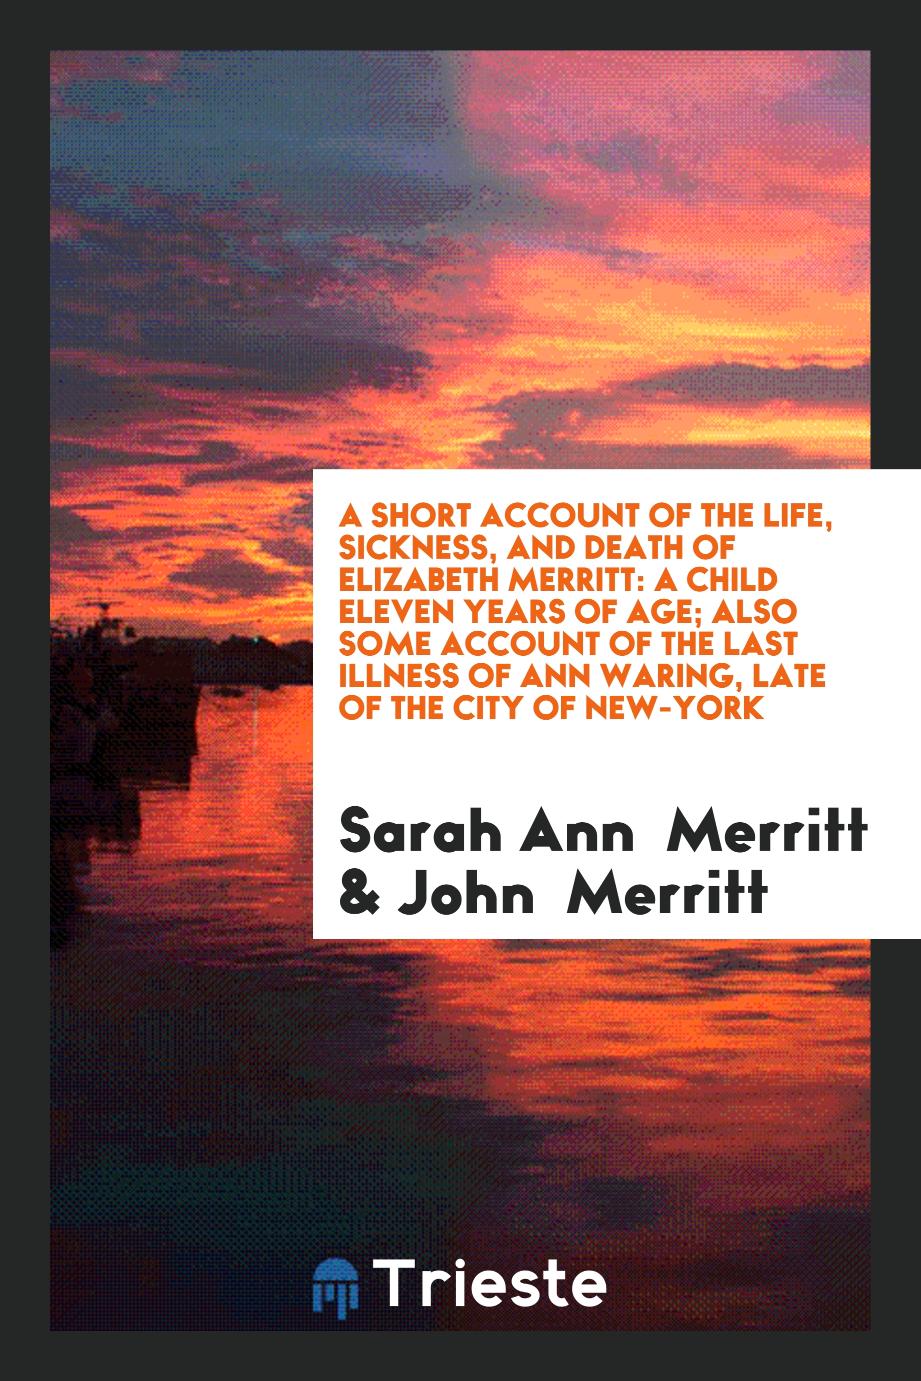 A Short Account of the Life, Sickness, and Death of Elizabeth Merritt: A Child Eleven Years of age; Also some account of the last illness of Ann Waring, late of the city of New-York